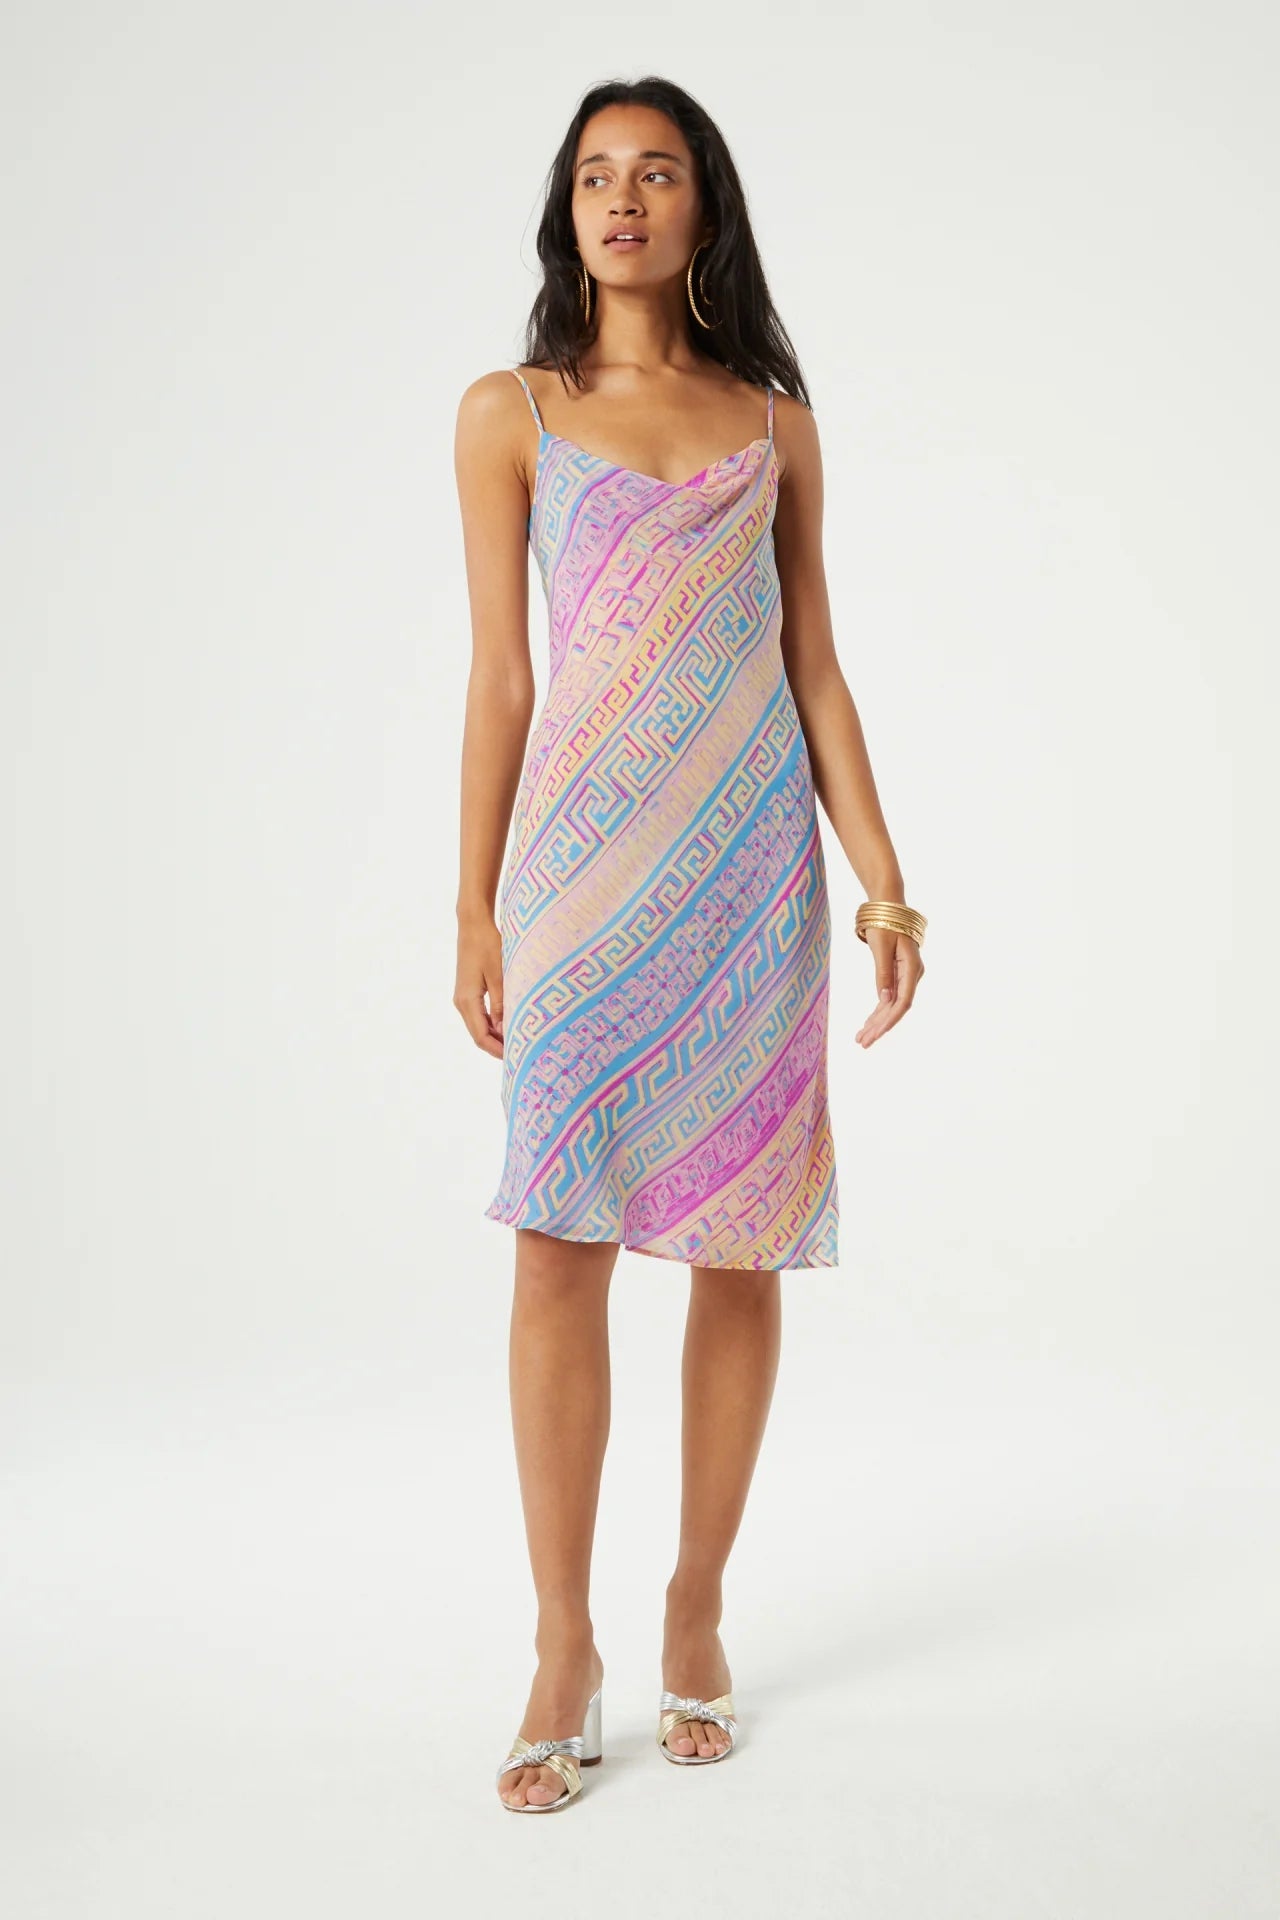 A woman stands wearing a multicolored, geometric-patterned slip dress with thin straps. She has long hair and is accessorized with gold bracelets, rings, and transparent high-heeled sandals.